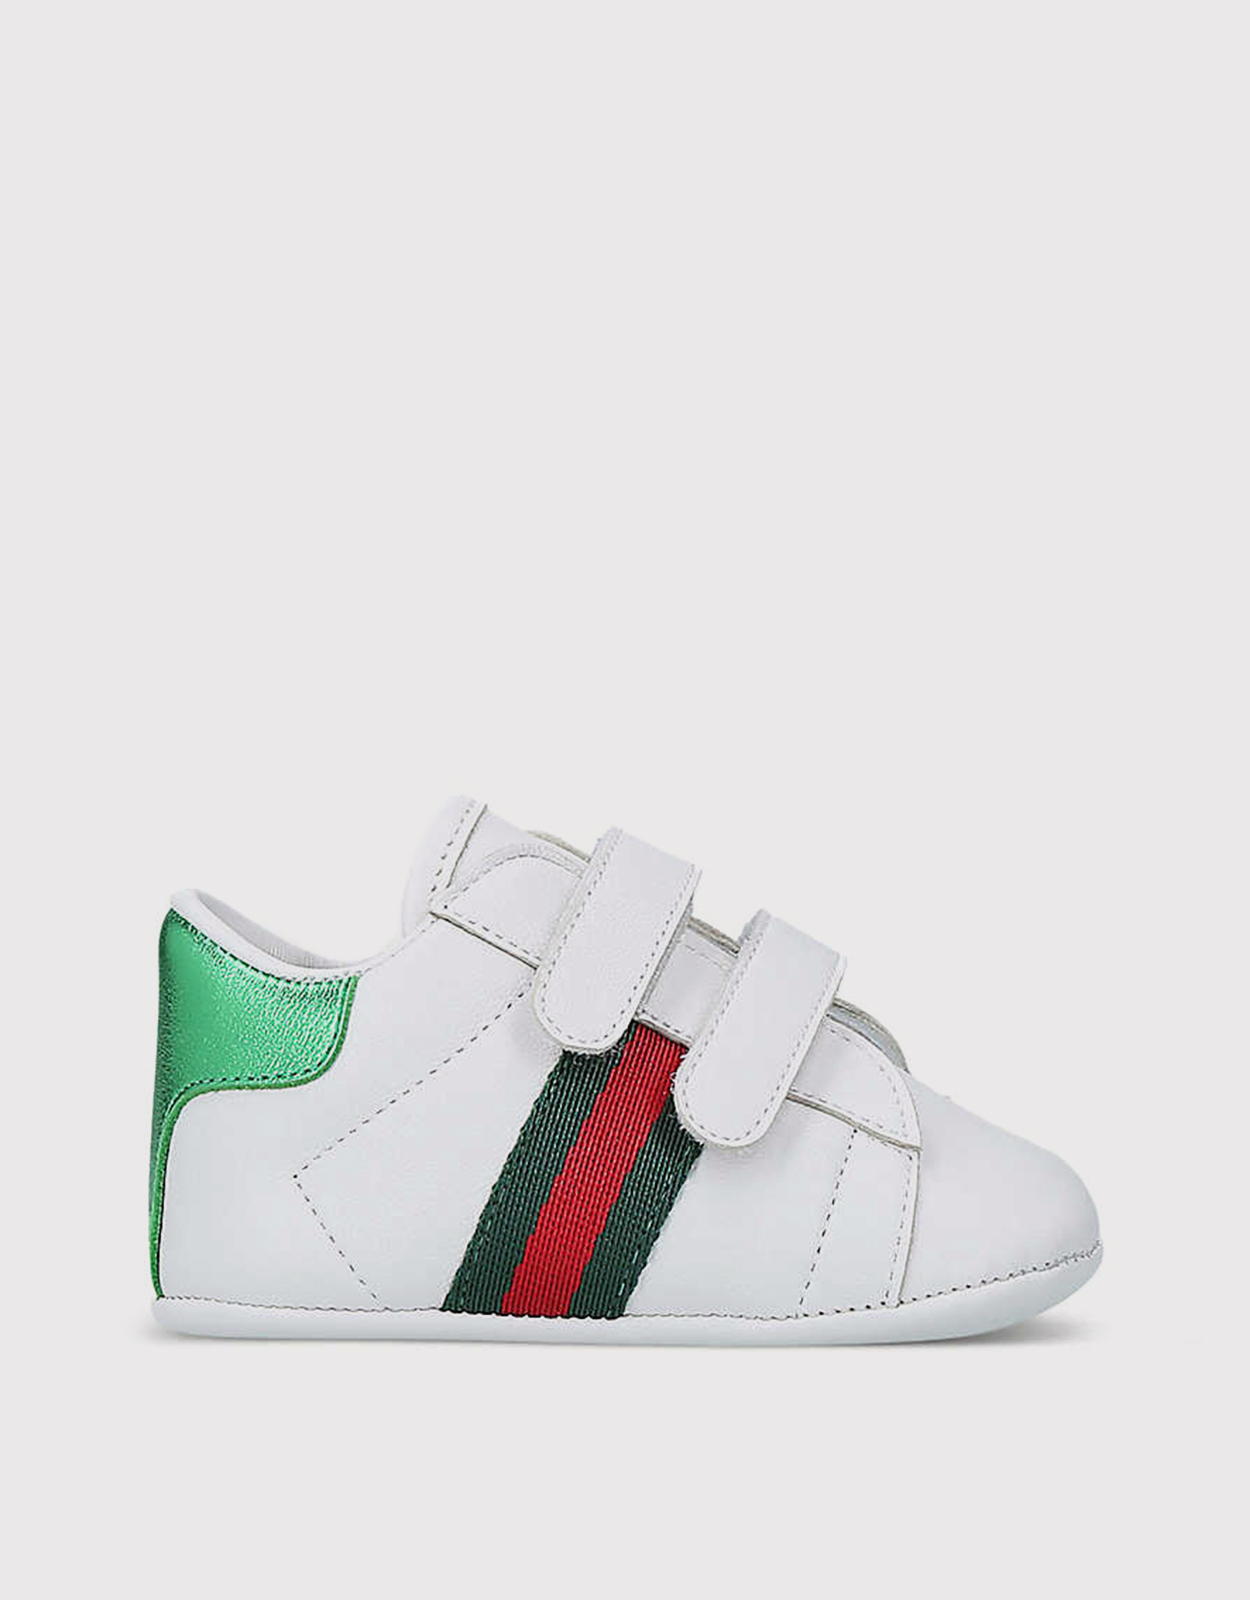 Gucci Baby Ace Leather Sneaker 0-9M IFCHIC.COM